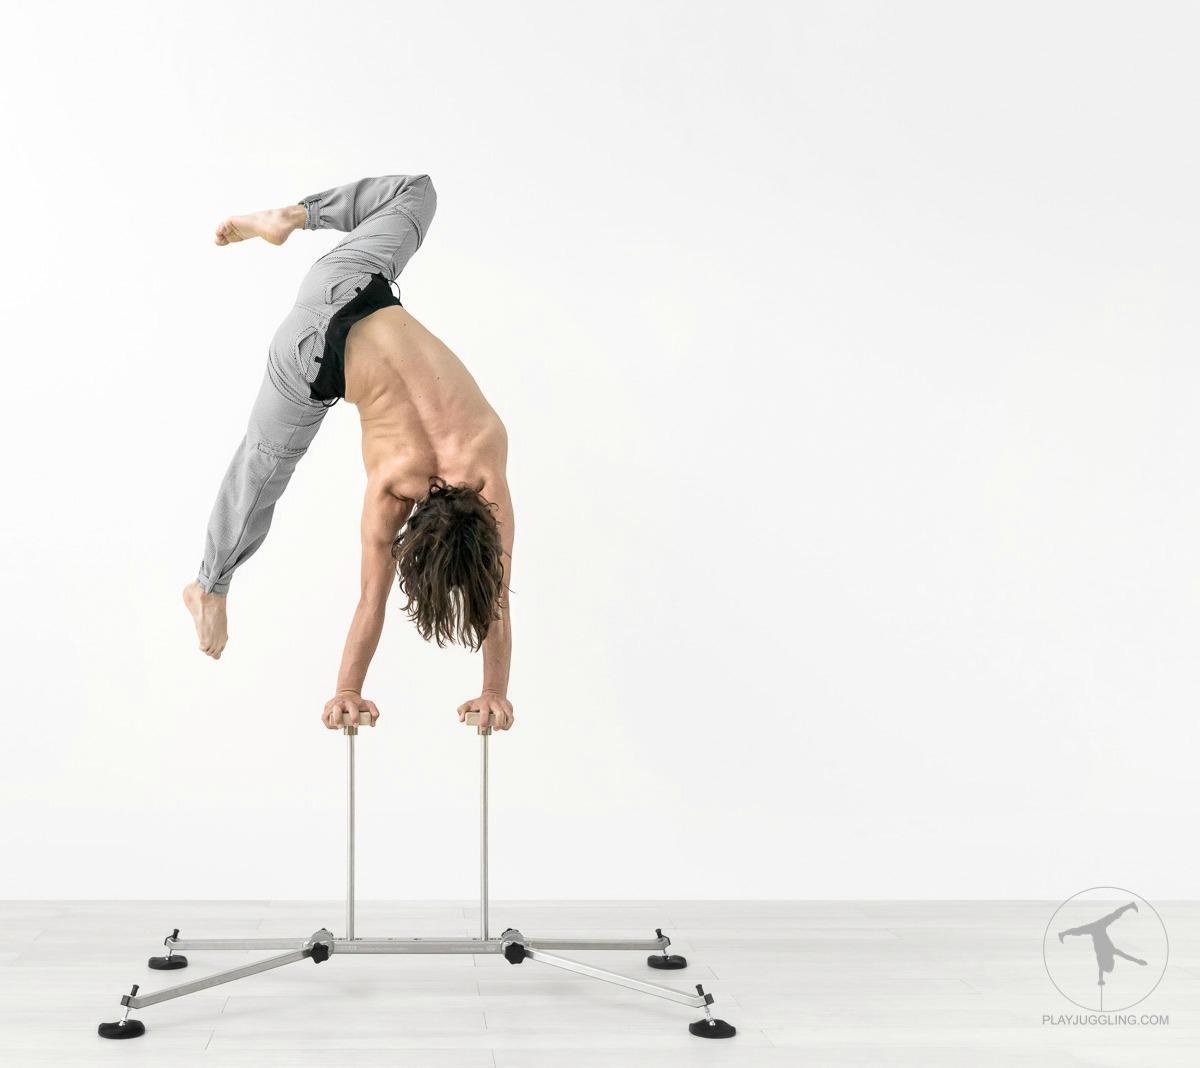 Rotating Handstand Platform with Canes